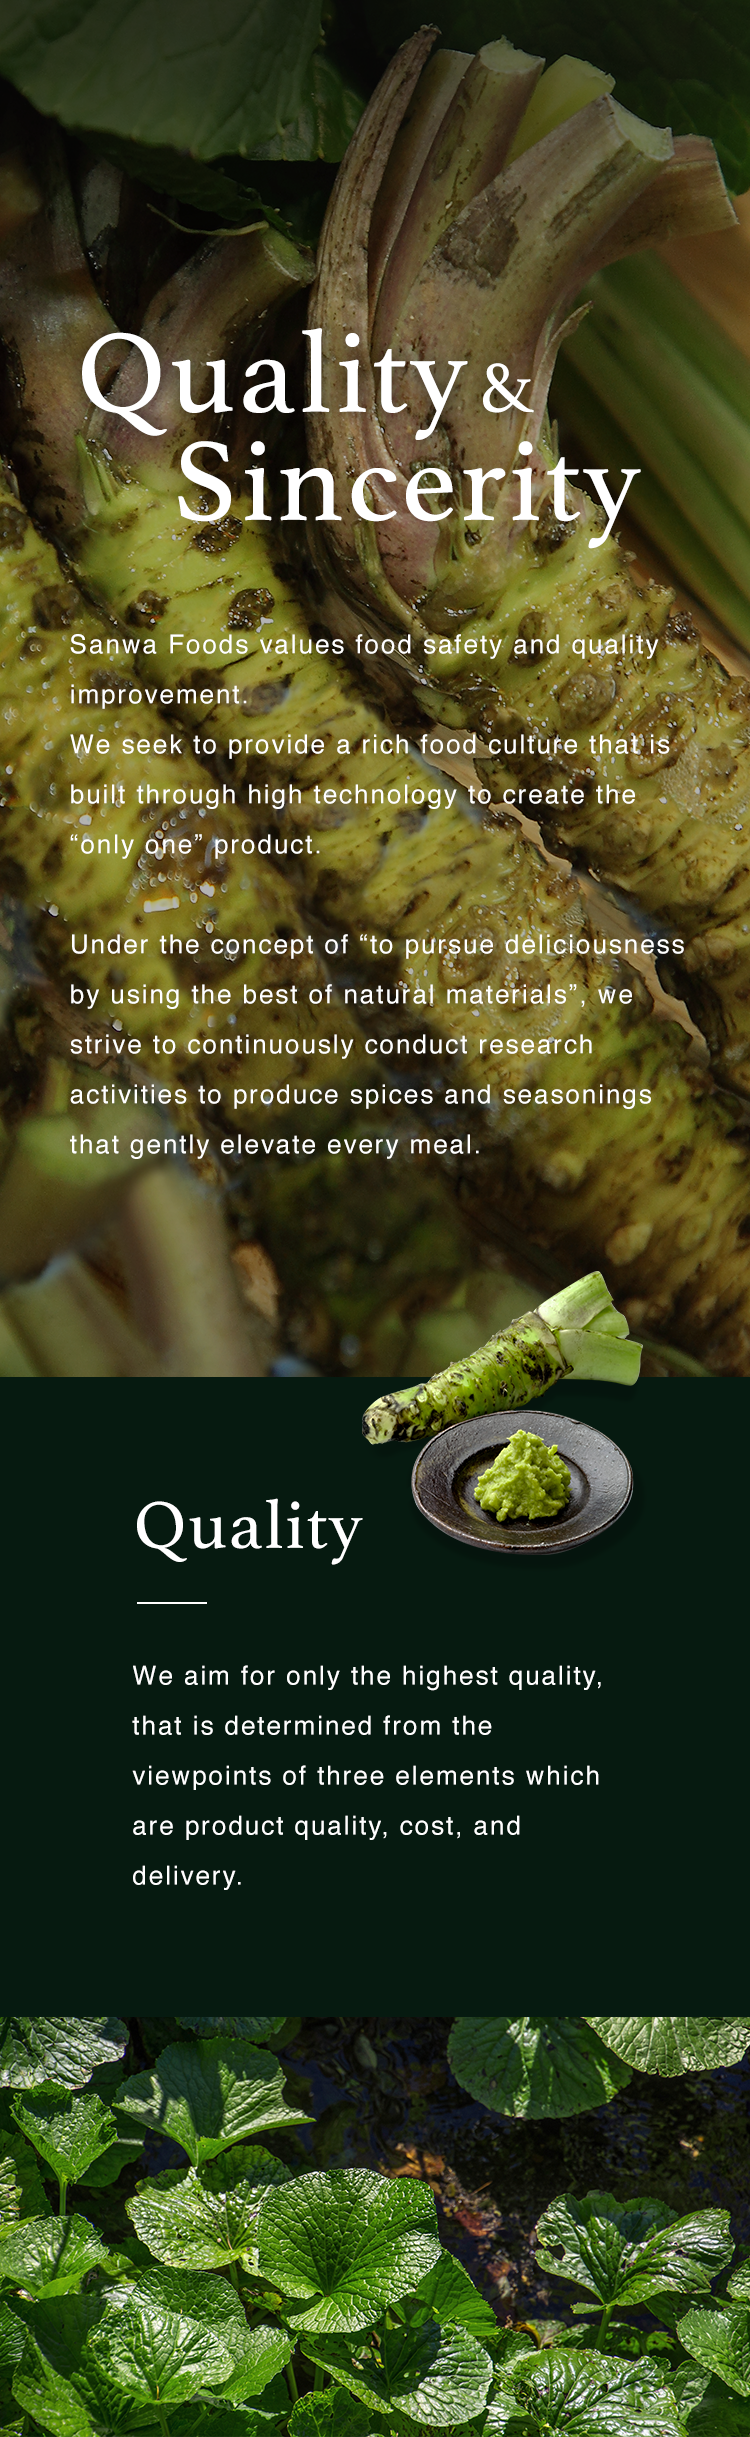 Quality & Sincerity - Sanwa Foods values food safety and quality improvement. We seek to provide a rich food culture that is built through high technology to create the “only one” product. Under the concept of “to pursue deliciousness by using the best of natural materials”, we strive to continuously conduct research activities to produce spices and seasonings that gently elevate every meal.